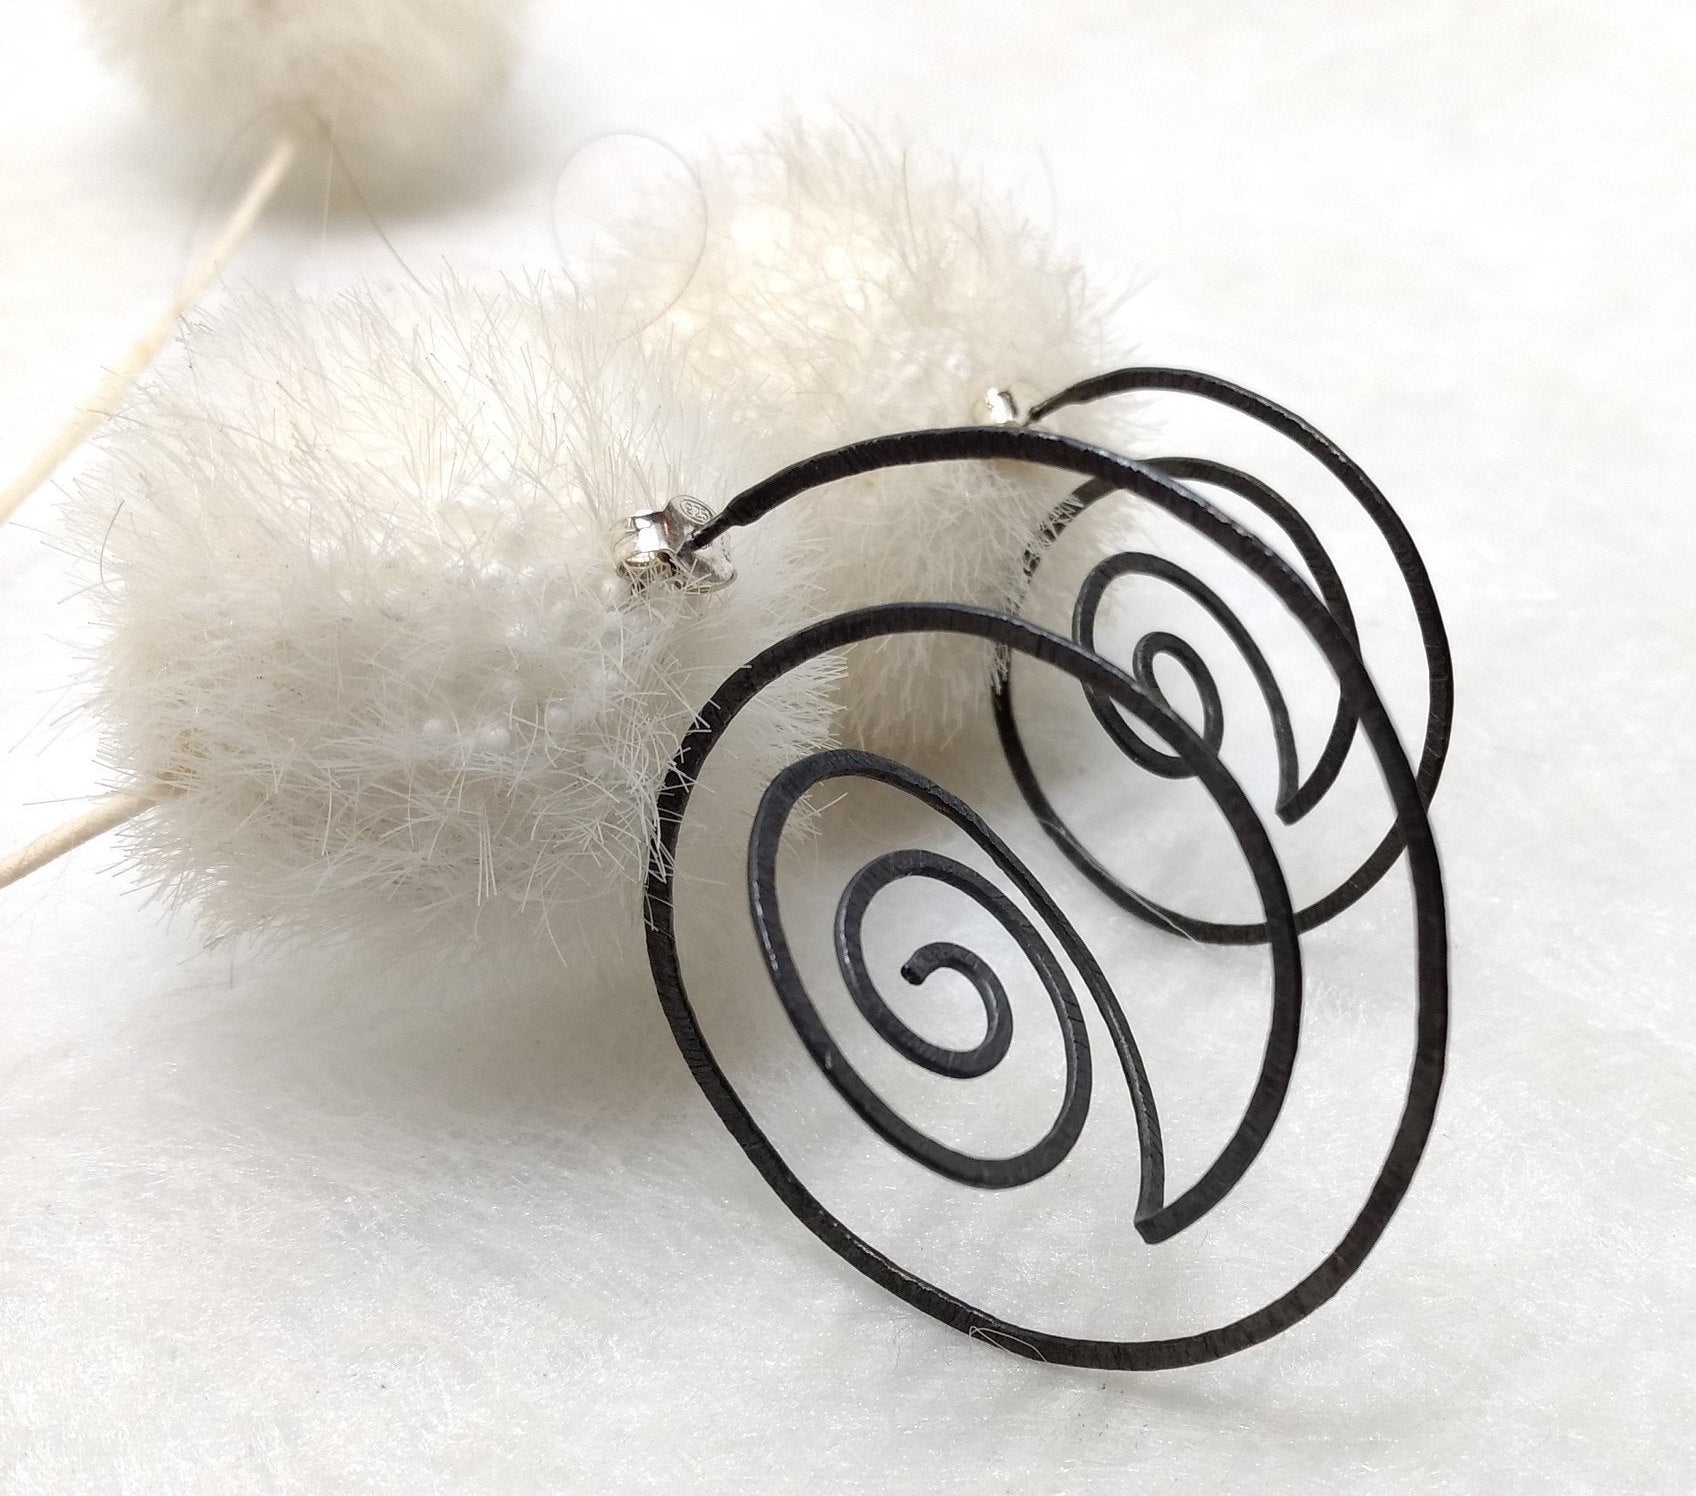 ZiMMt - 3D Sterling Silver hoops with a black finish, available in 2 sizes